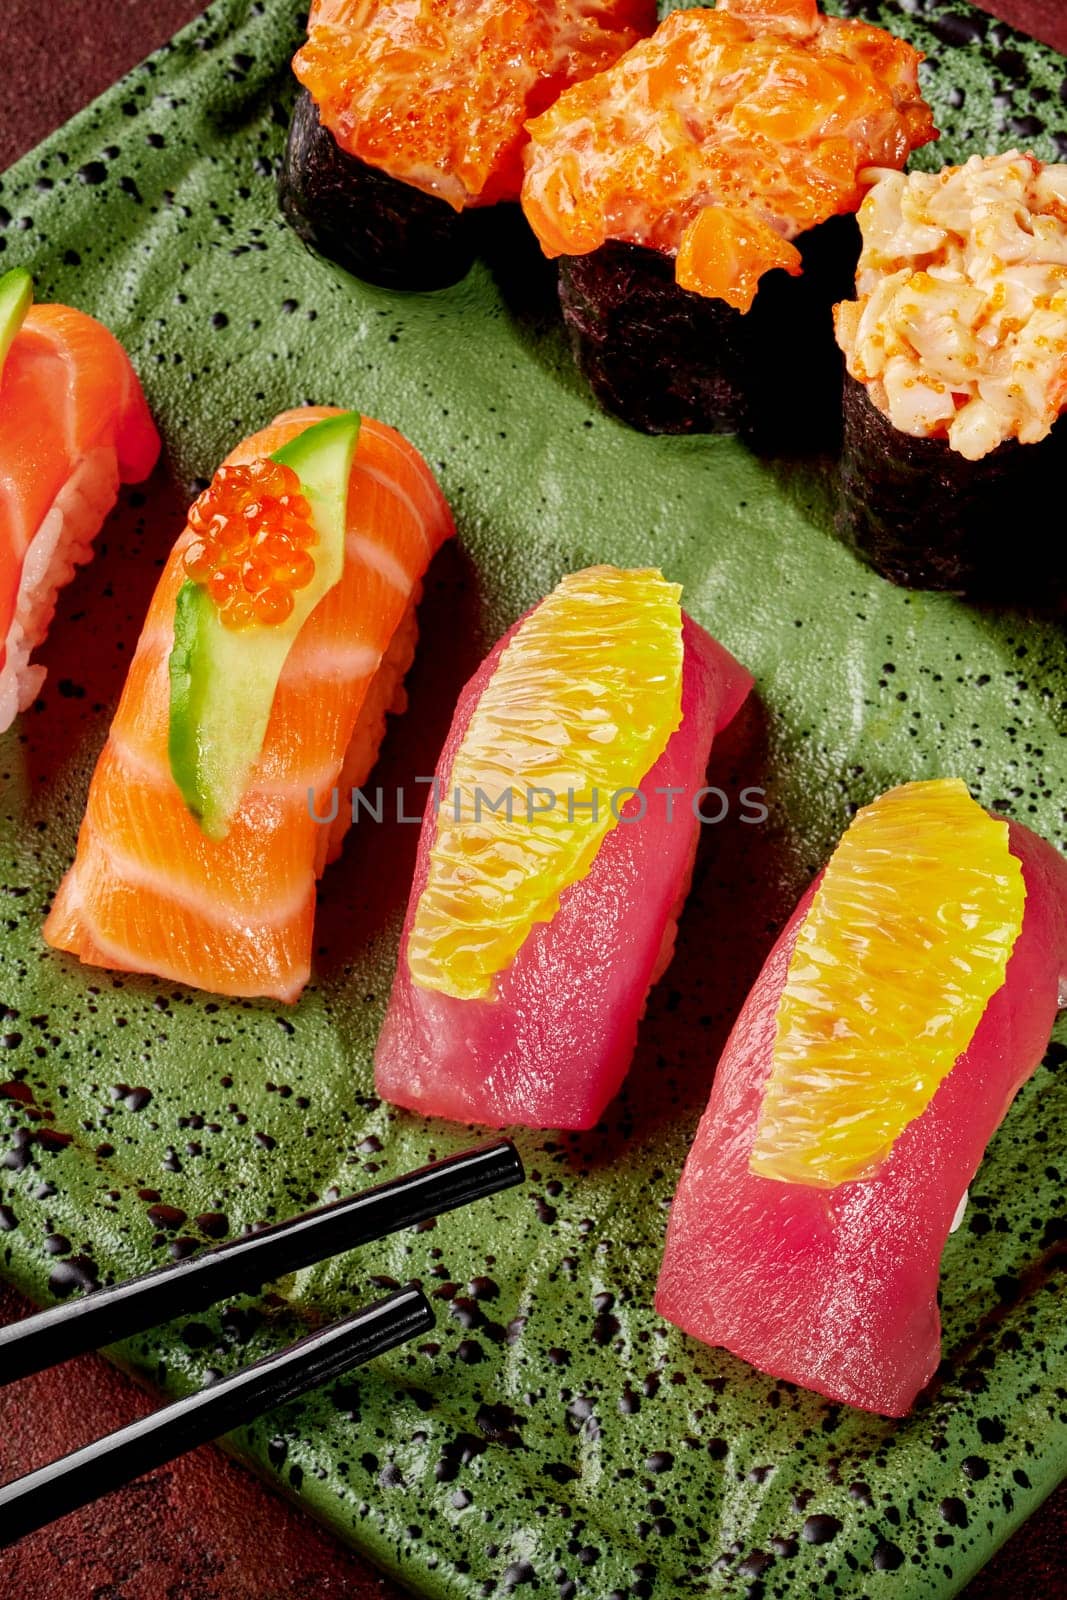 Delectable nigiri sushi with slices of fresh tuna and salmon, adorned with orange, cucumber, and caviar, served on speckled green plate with gunkan maki and chopsticks ready for Japanese style lunch